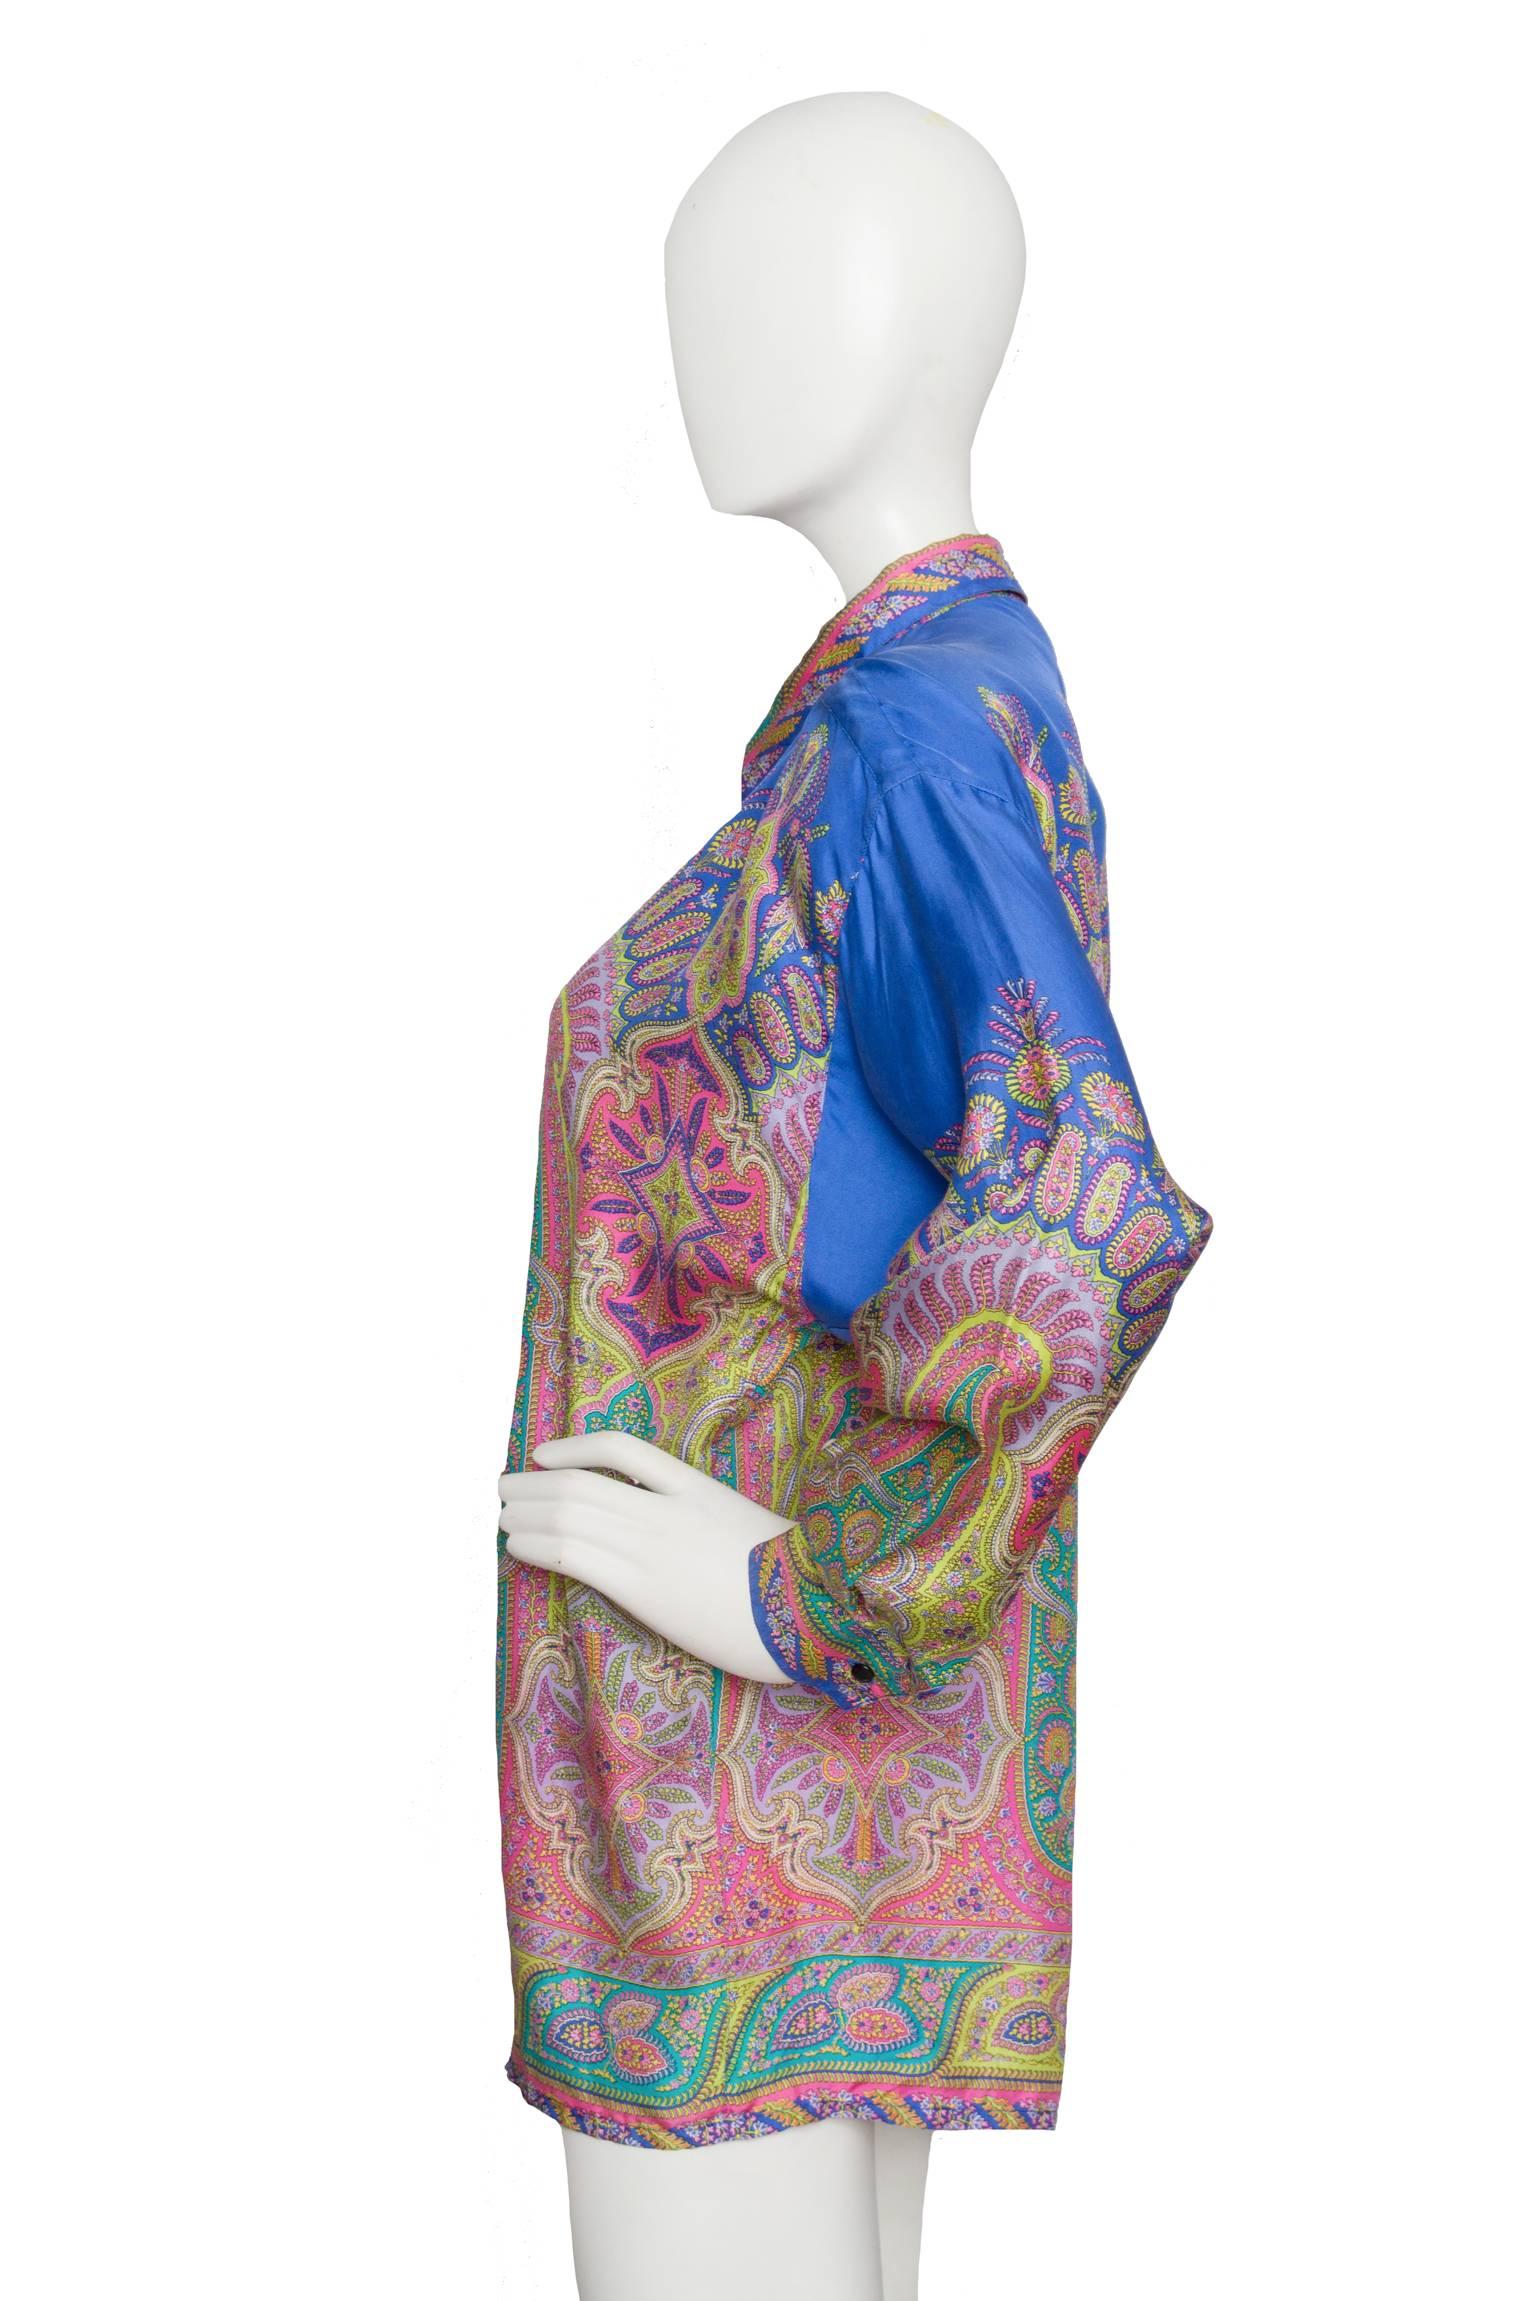 A gorgeous 90s Versace paisley print silk shirt with a hidden front buttoned closure and one button cuffs. The intricate paisley print is held in bright pink, green and yellow set on a light blue background. 

The size of the blouse corresponds to